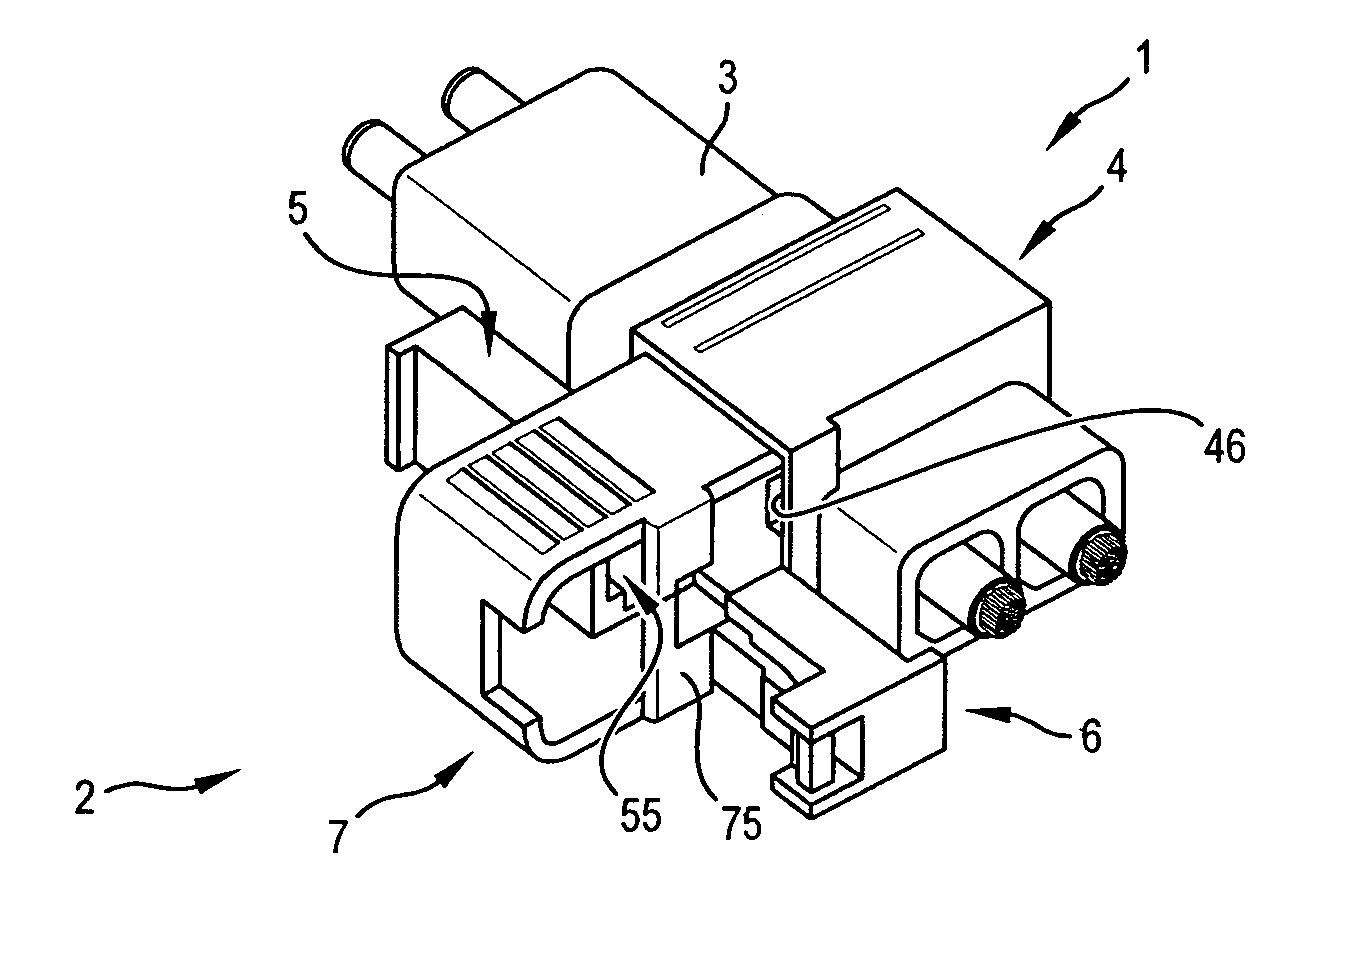 Electrical connector system with power and command connectors